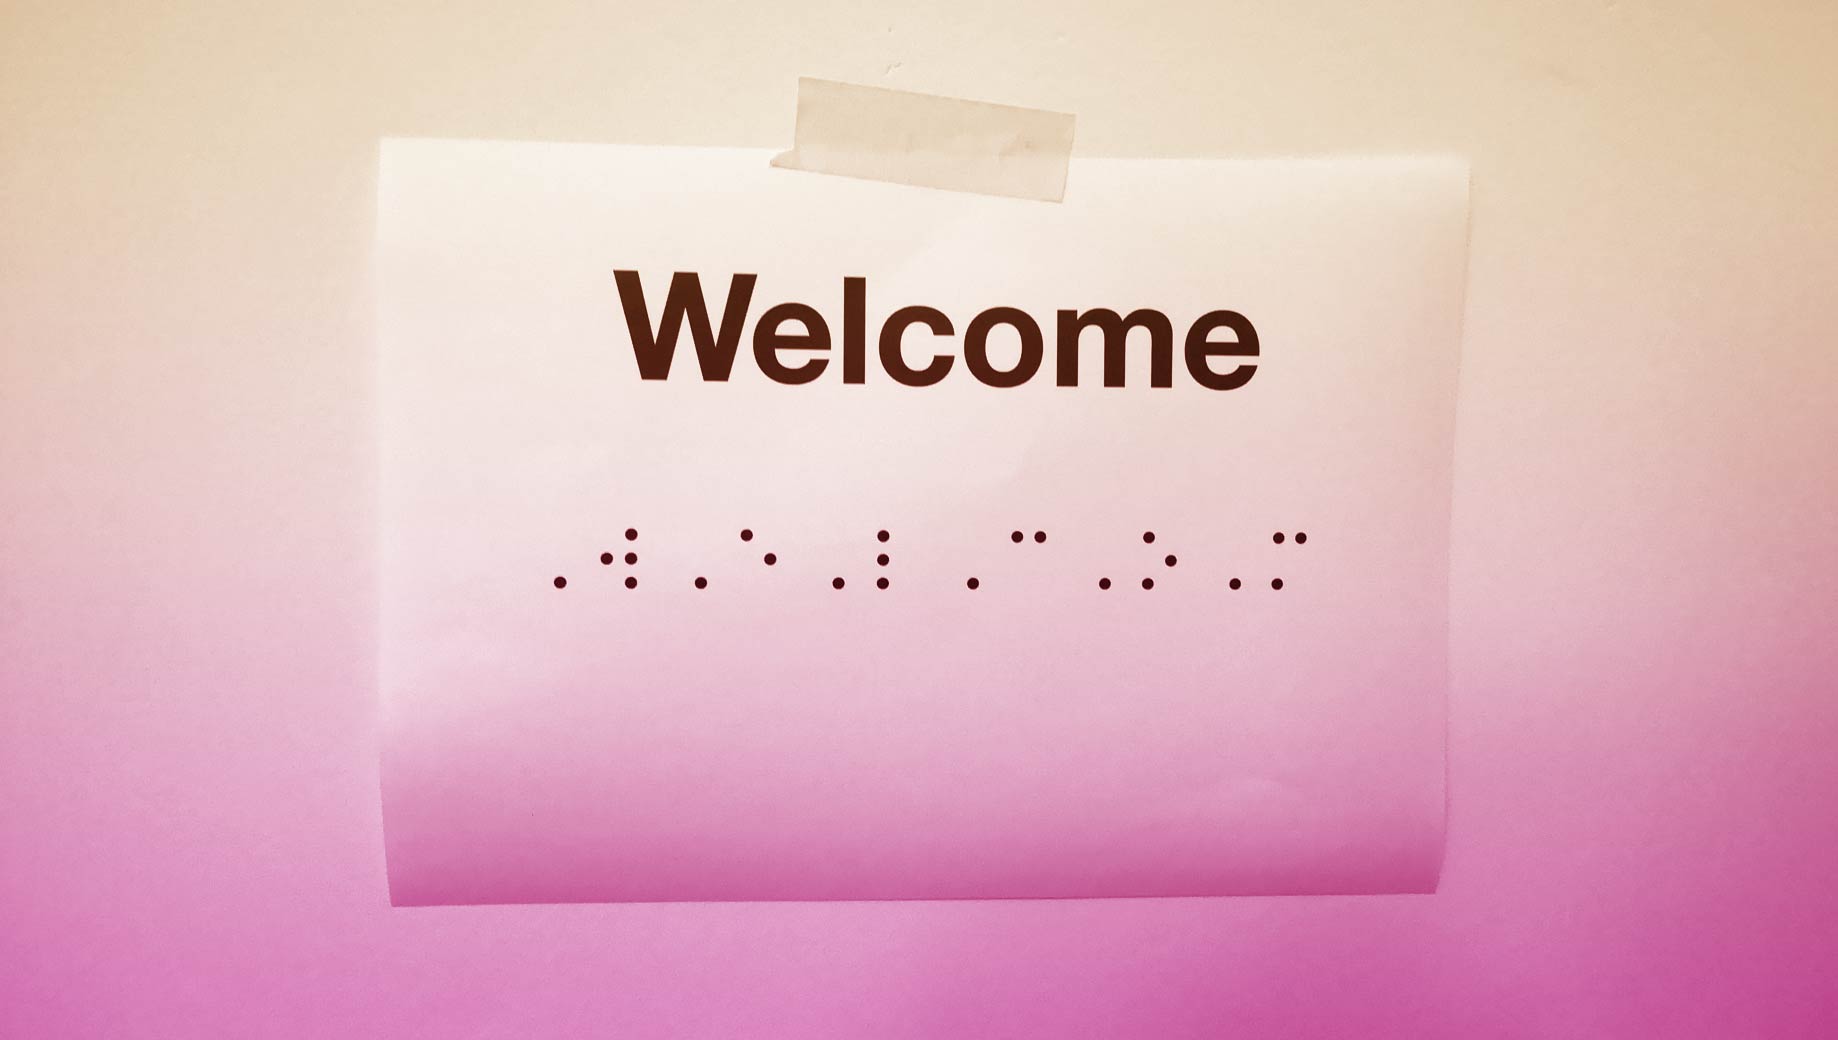 A printed piece of paper that says Welcome in braille